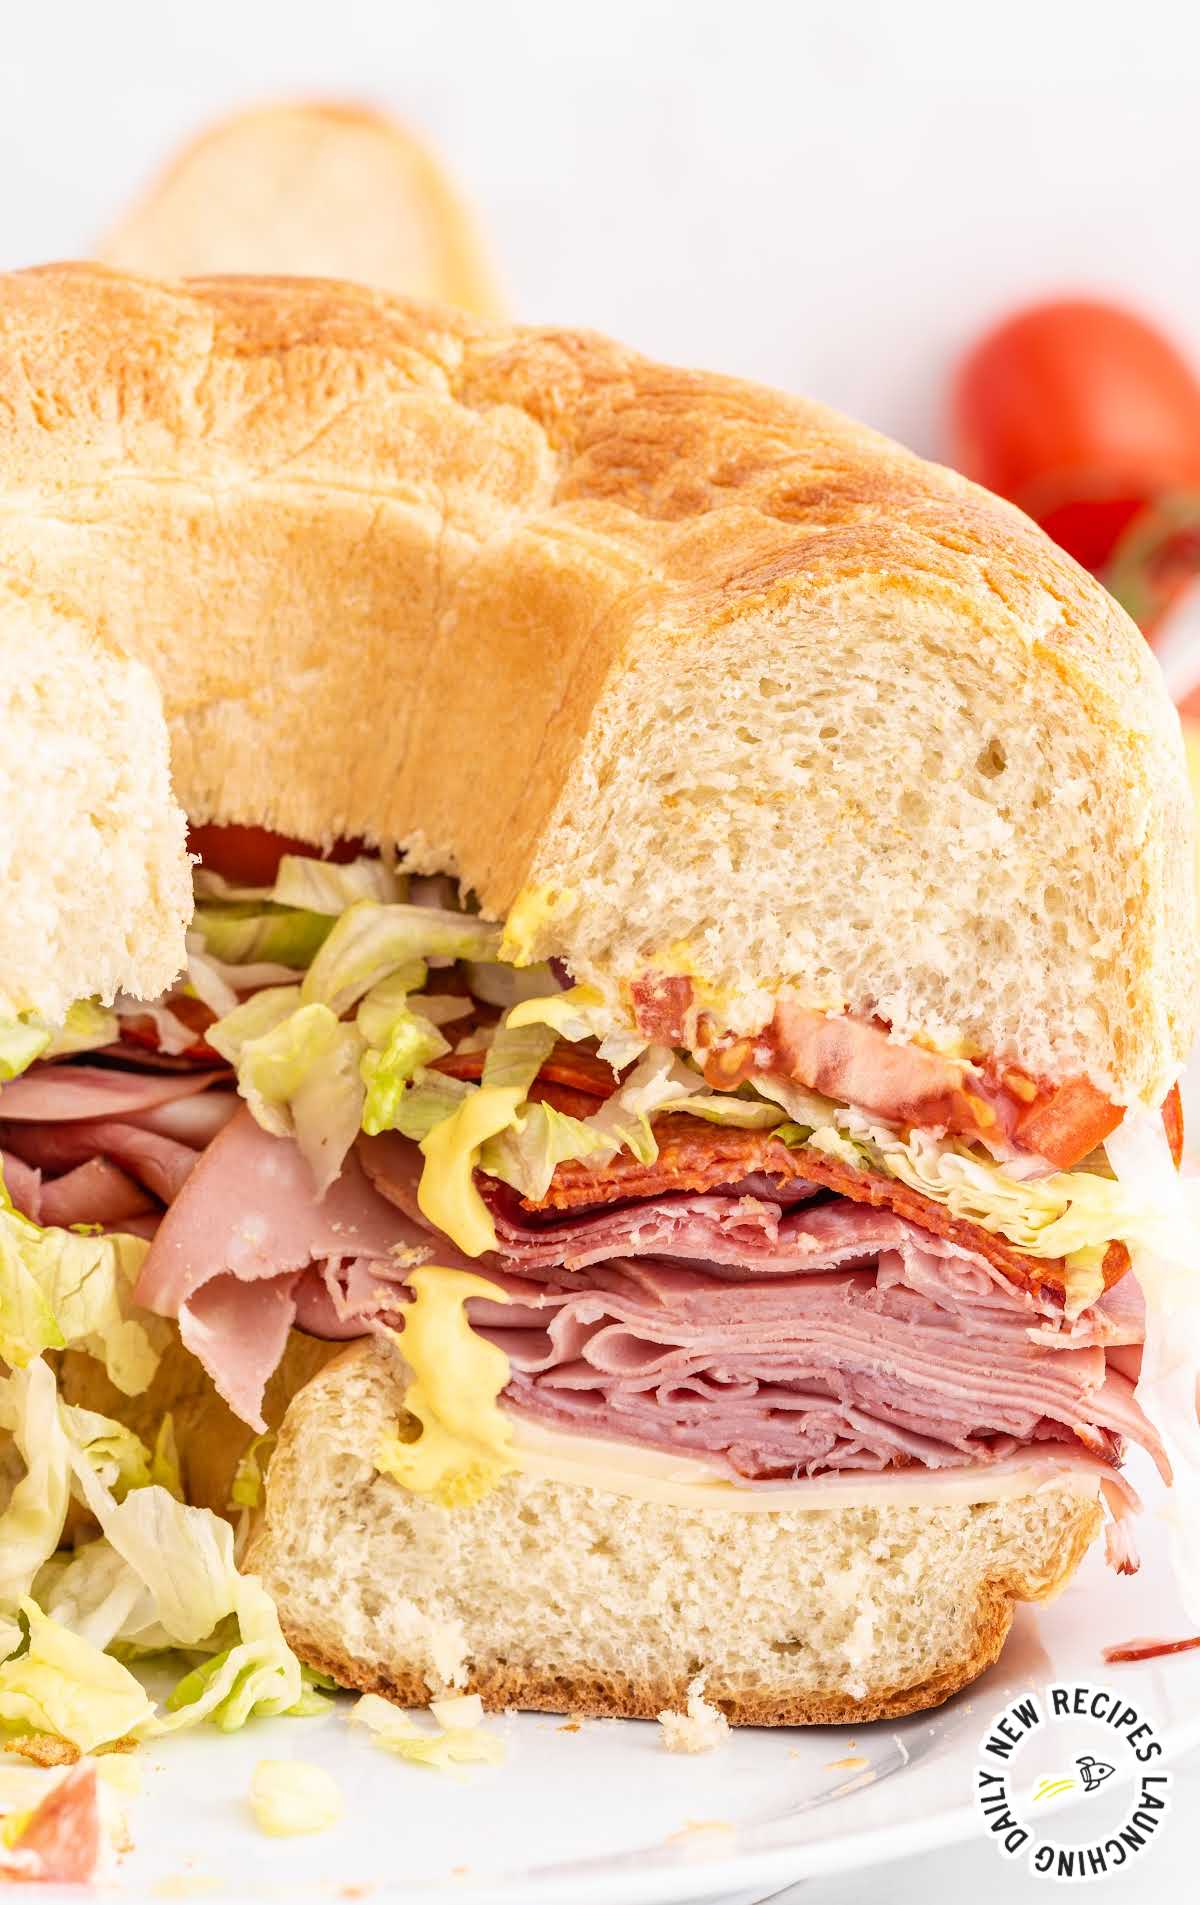 close up shot of a Party Sub with slices missing on a plate